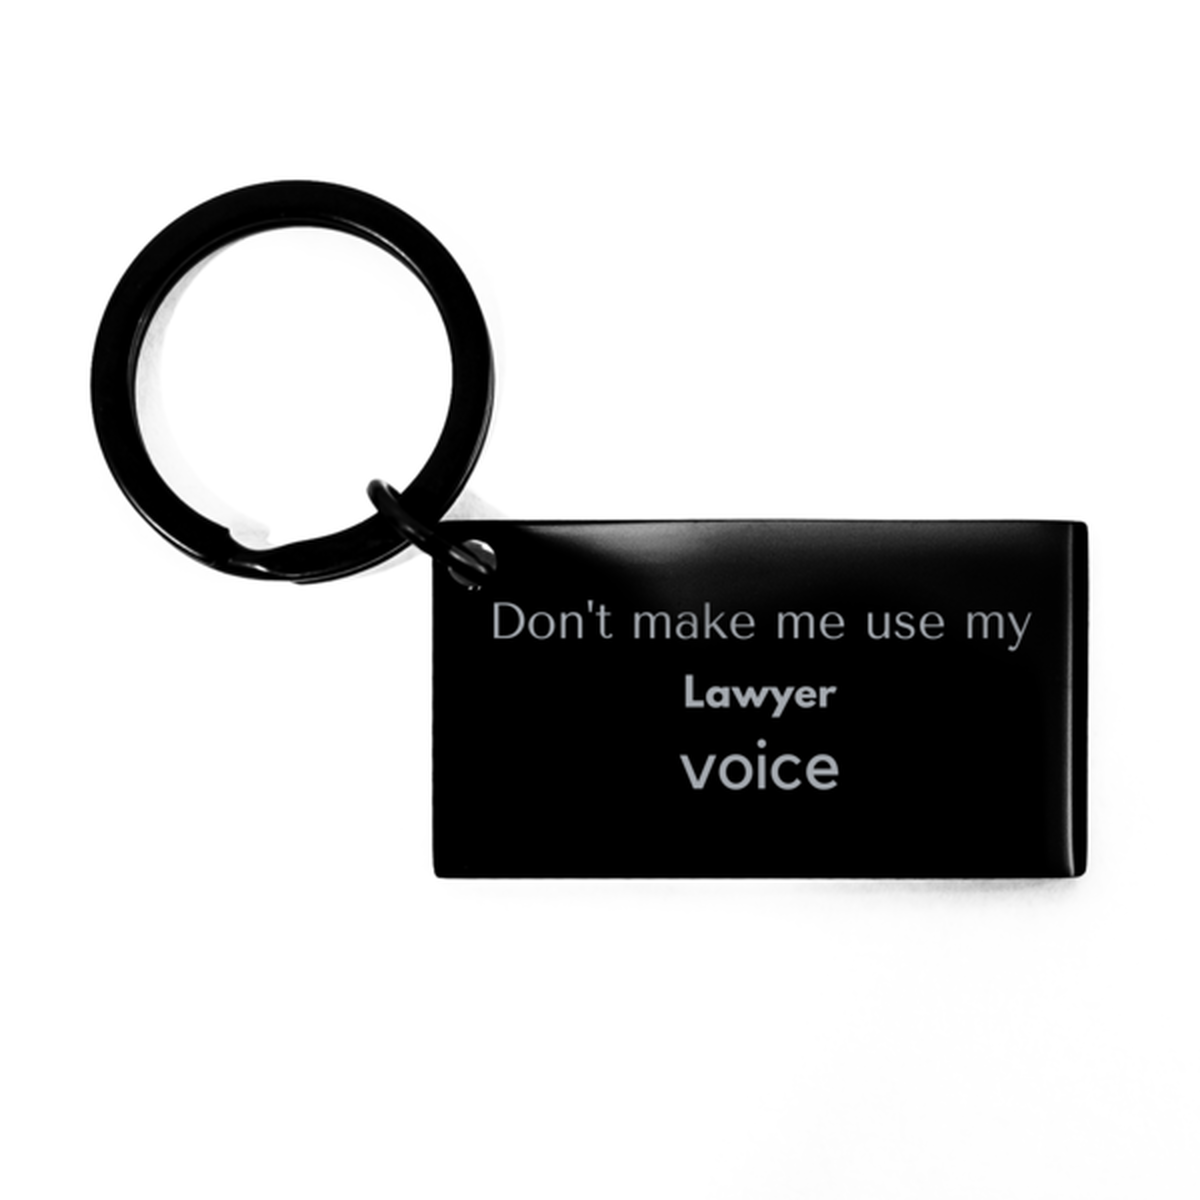 Don't make me use my Lawyer voice, Sarcasm Lawyer Gifts, Christmas Lawyer Keychain Birthday Unique Gifts For Lawyer Coworkers, Men, Women, Colleague, Friends